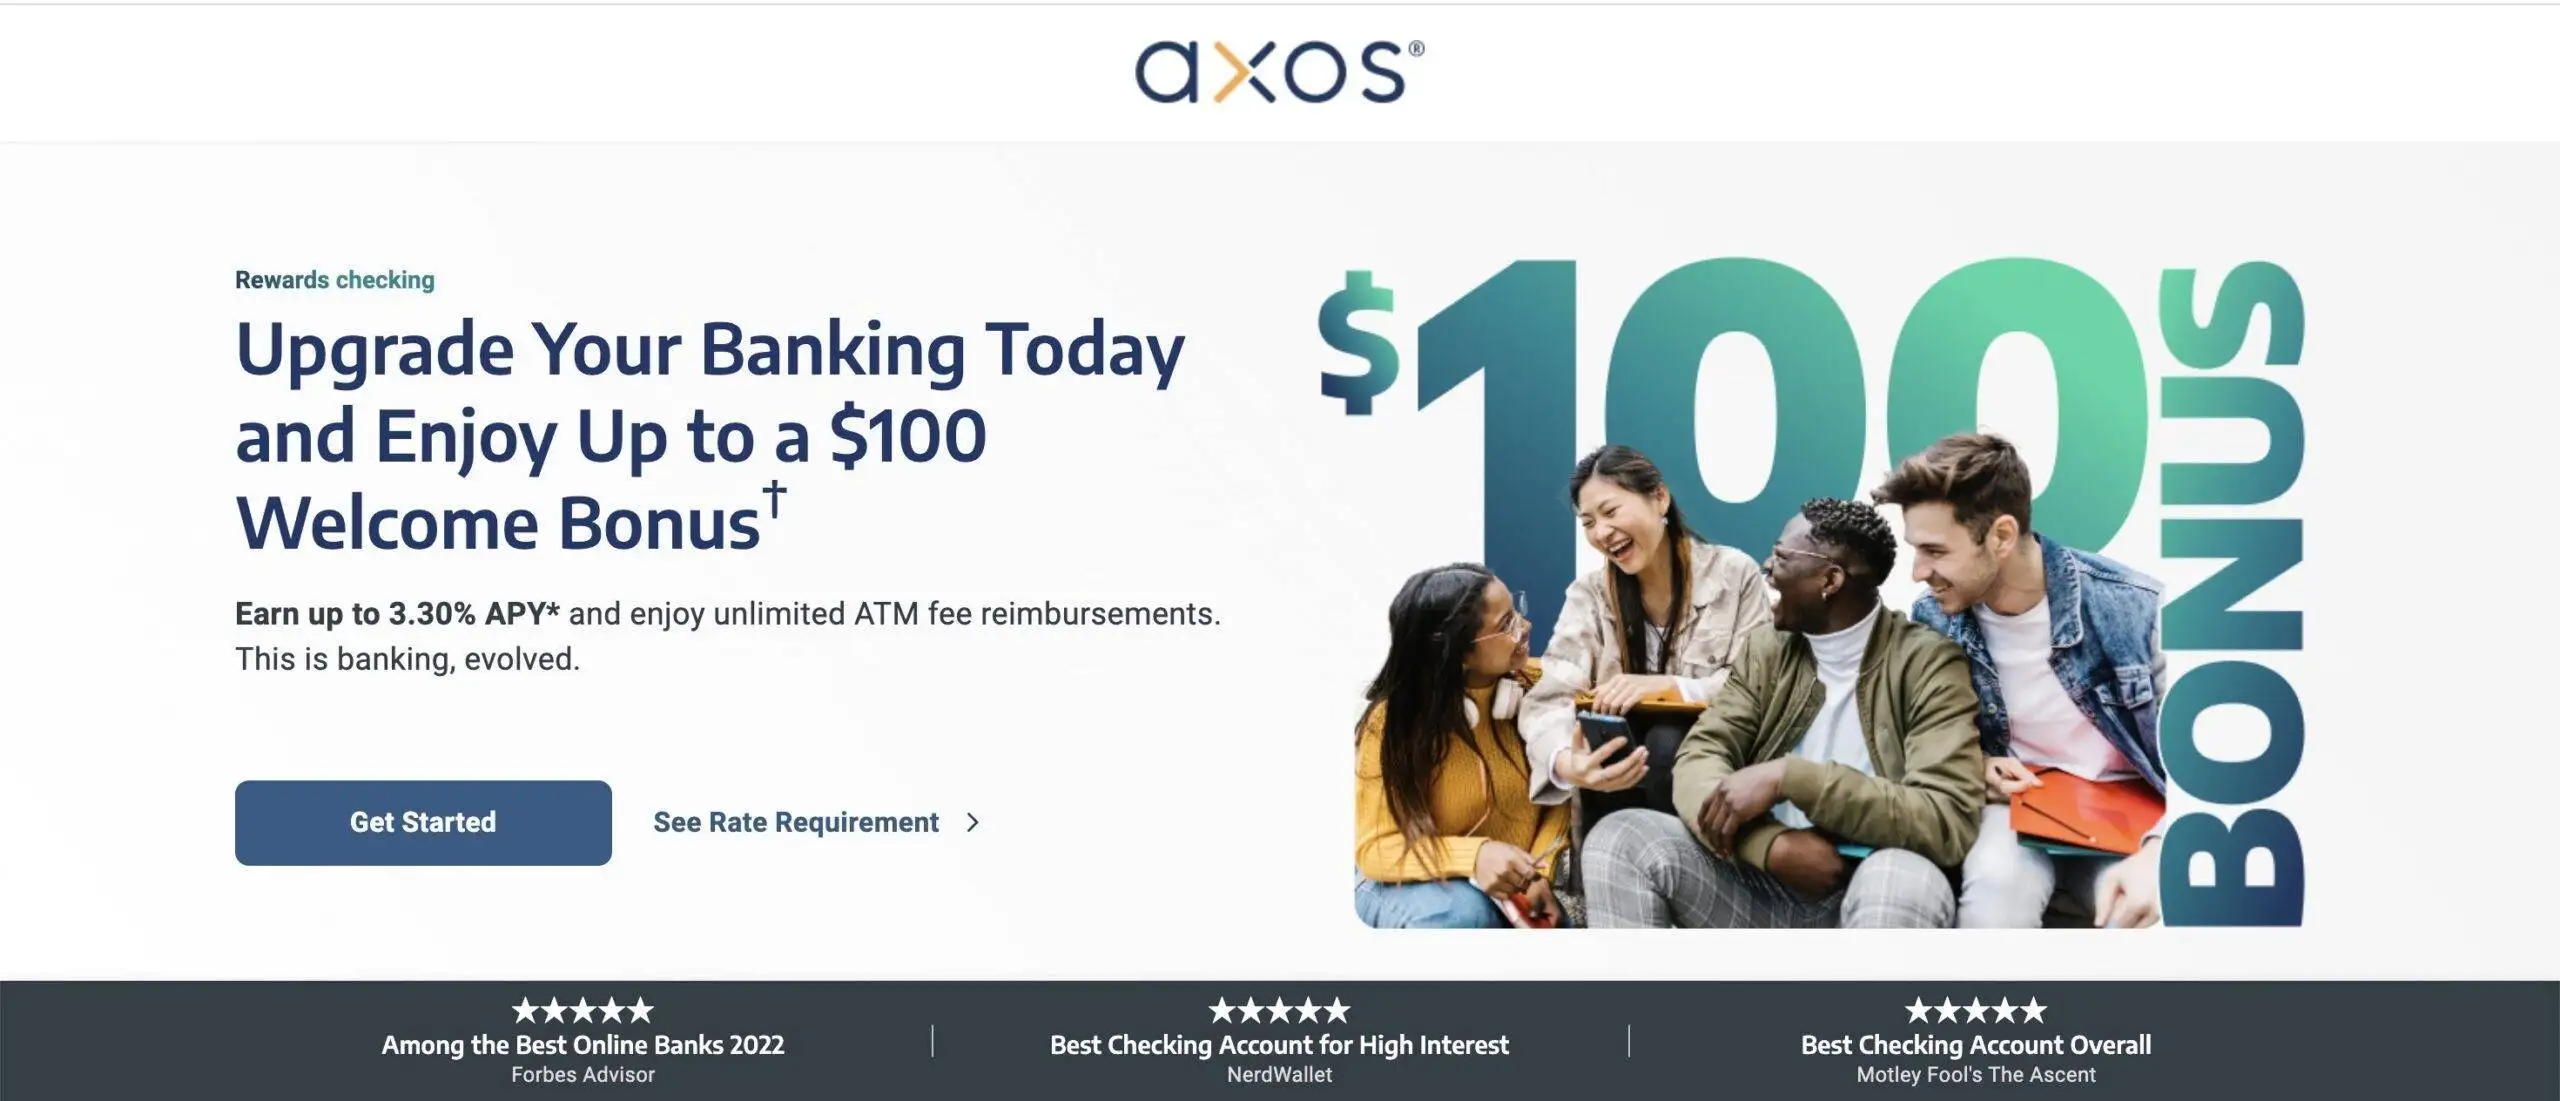 Axos Checking Account Features